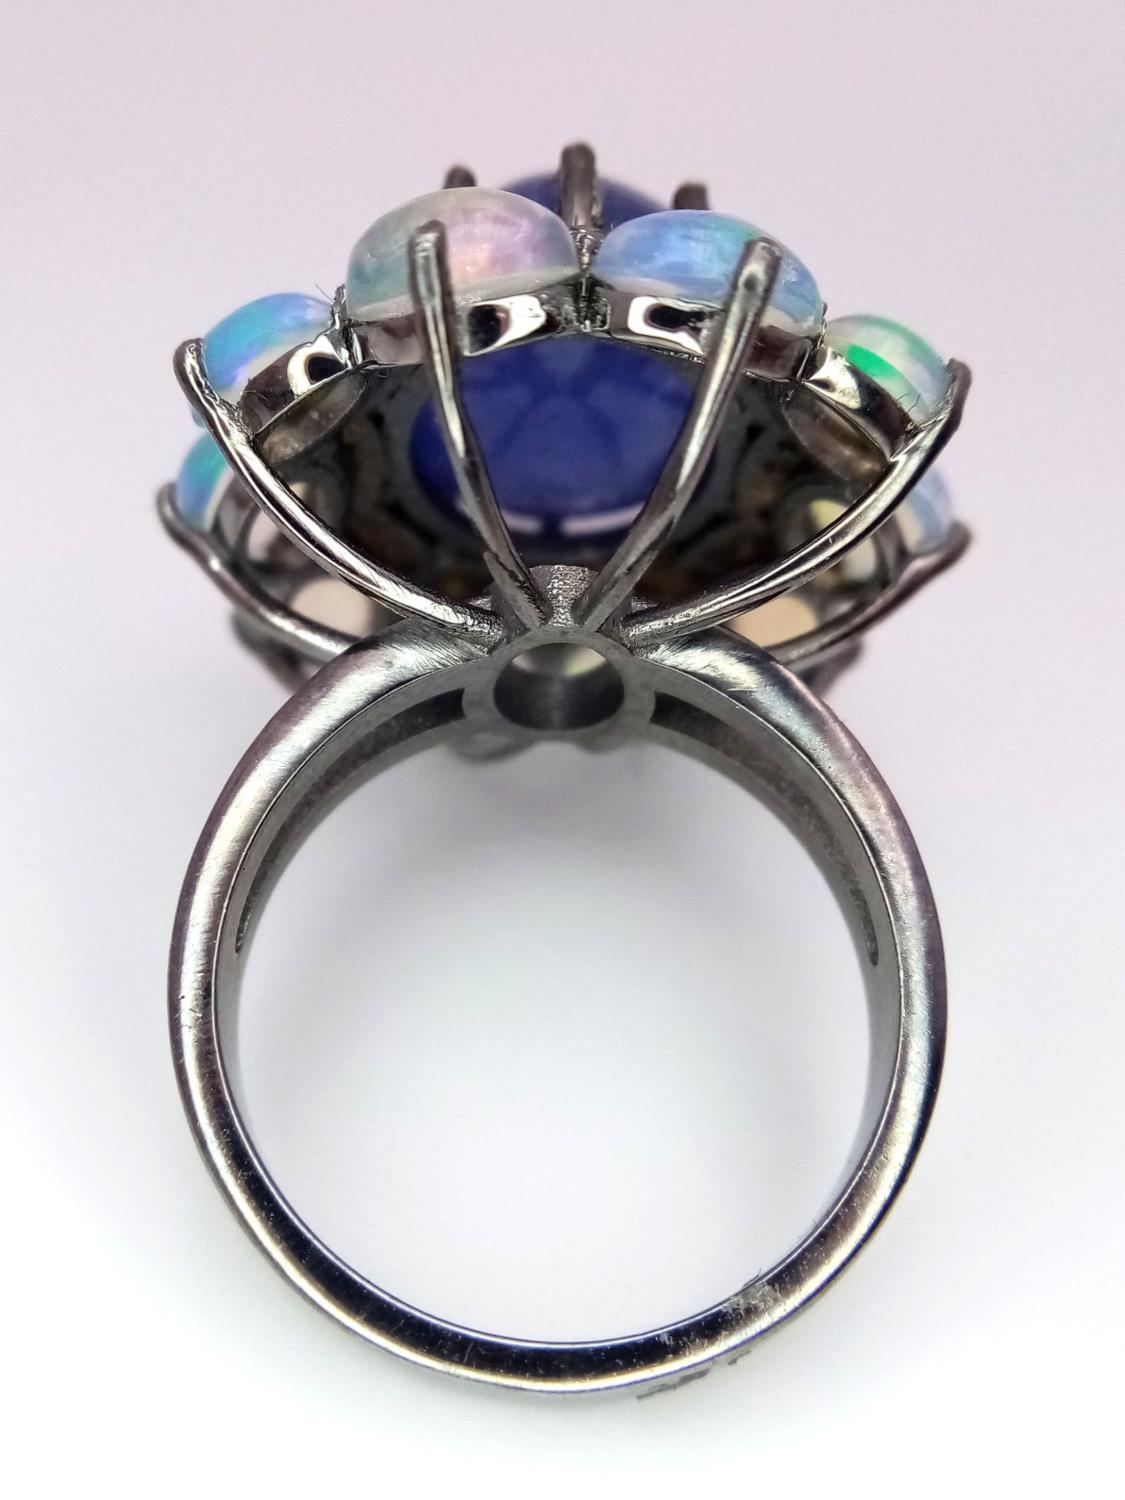 A 10ct Tanzanite Gemstone Dress Ring with 3ctw Opal Surround and 0.50ctw of Diamond Accents. Size N. - Image 4 of 5